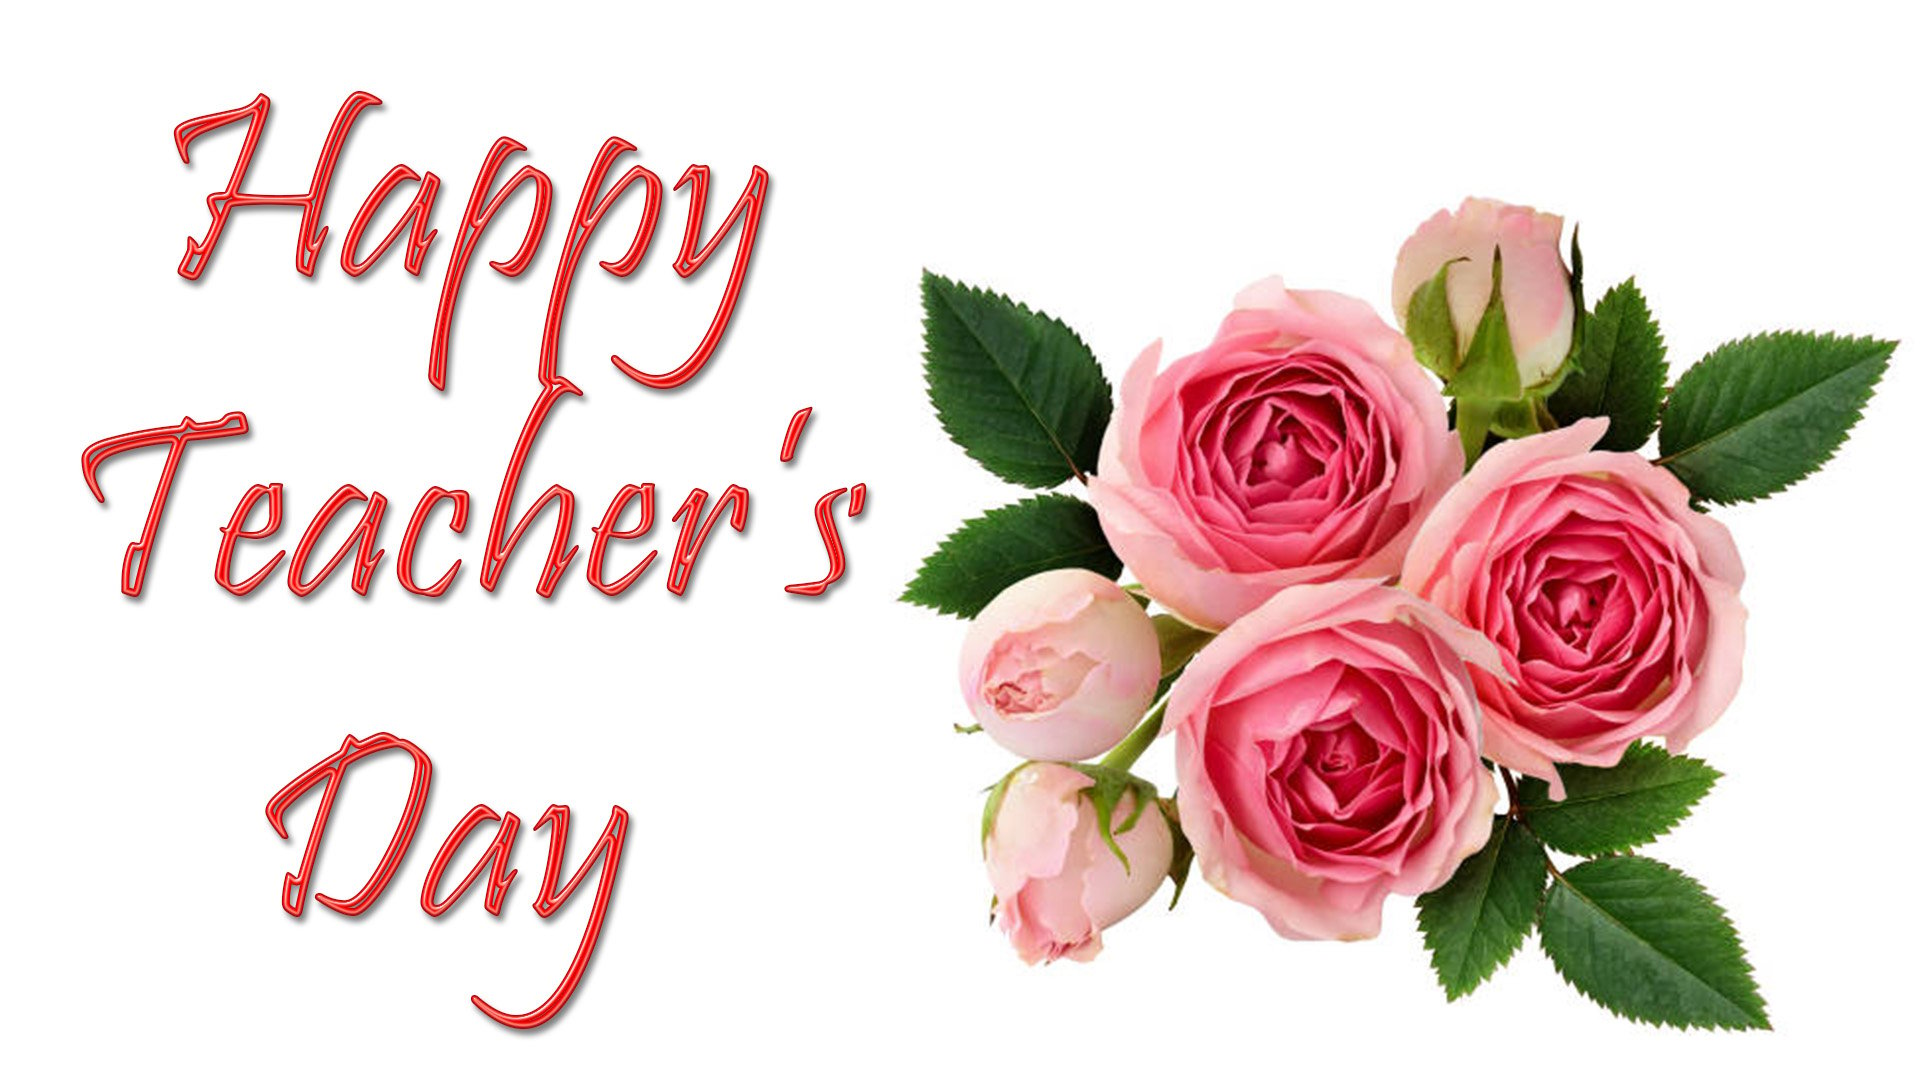 Happy Teachers Day Image & Picture. Teacher's Day Wishes